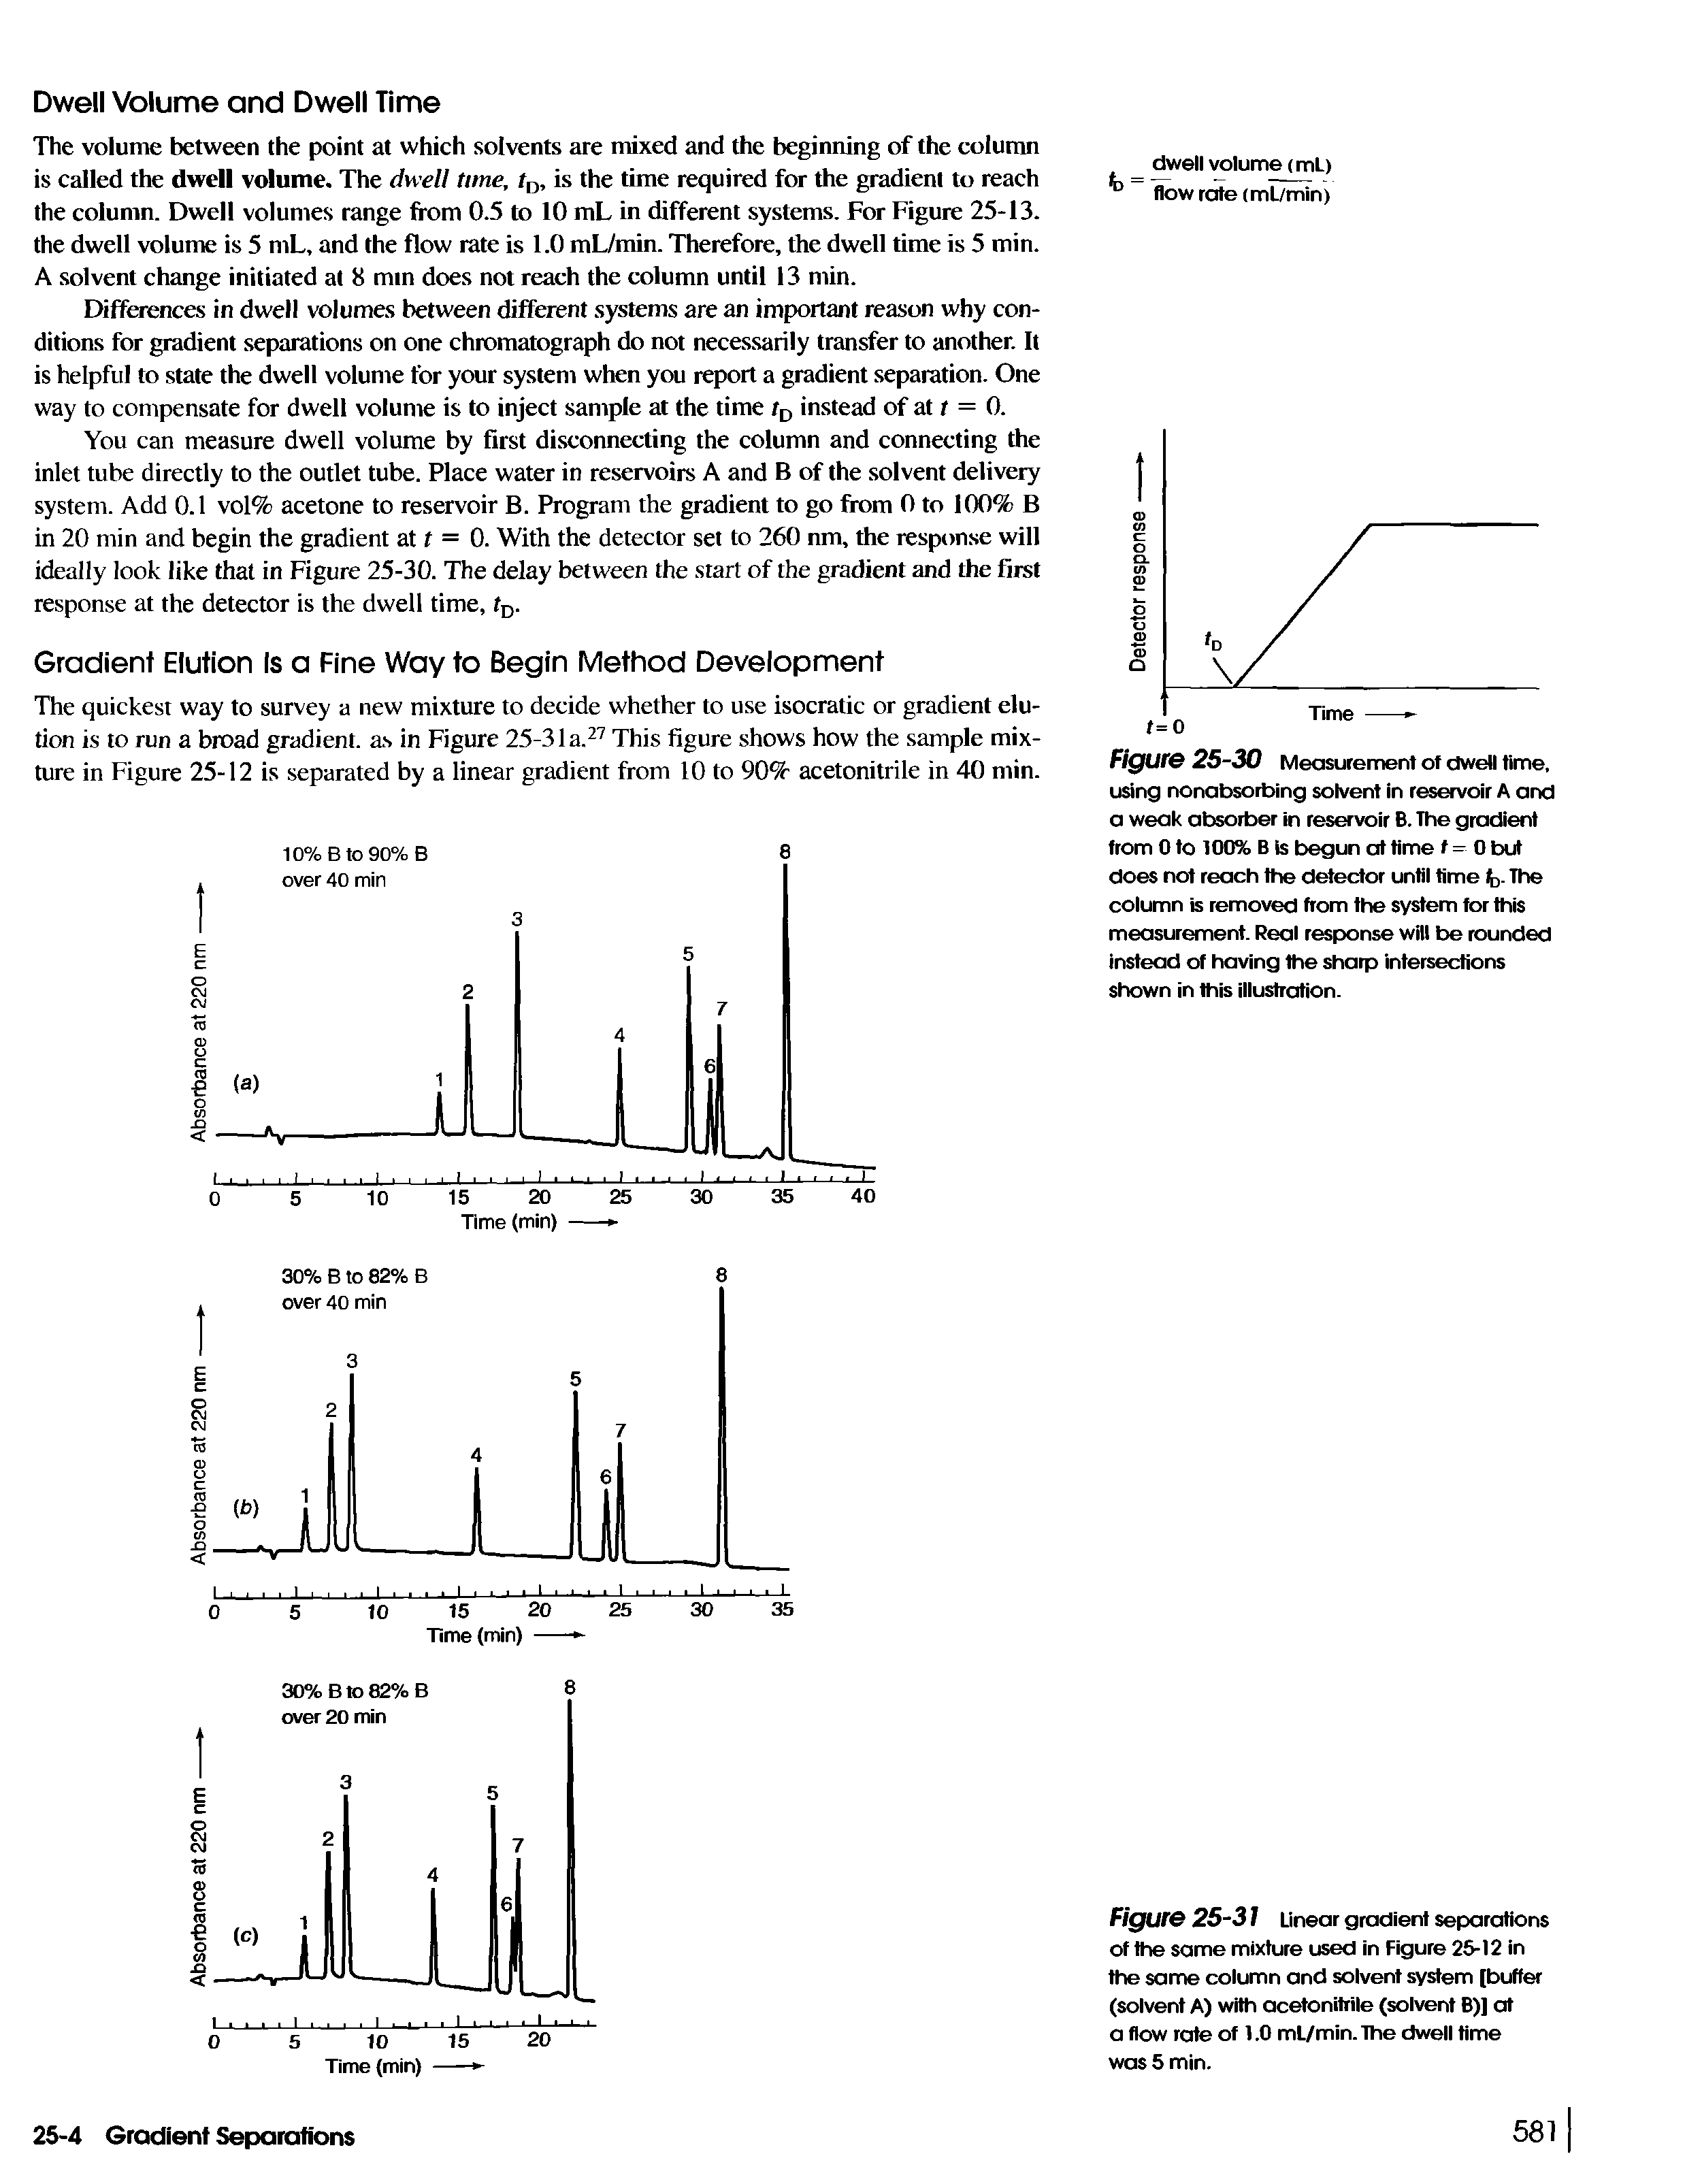 Figure 25-31 Linear gradient separations of the same mixture used in Figure 25-12 in the same column and solvent system [buffer (solvent A) with acetonitrile (solvent B)] at a flow rate of 1.0 mL/min. The dwell time was 5 min.